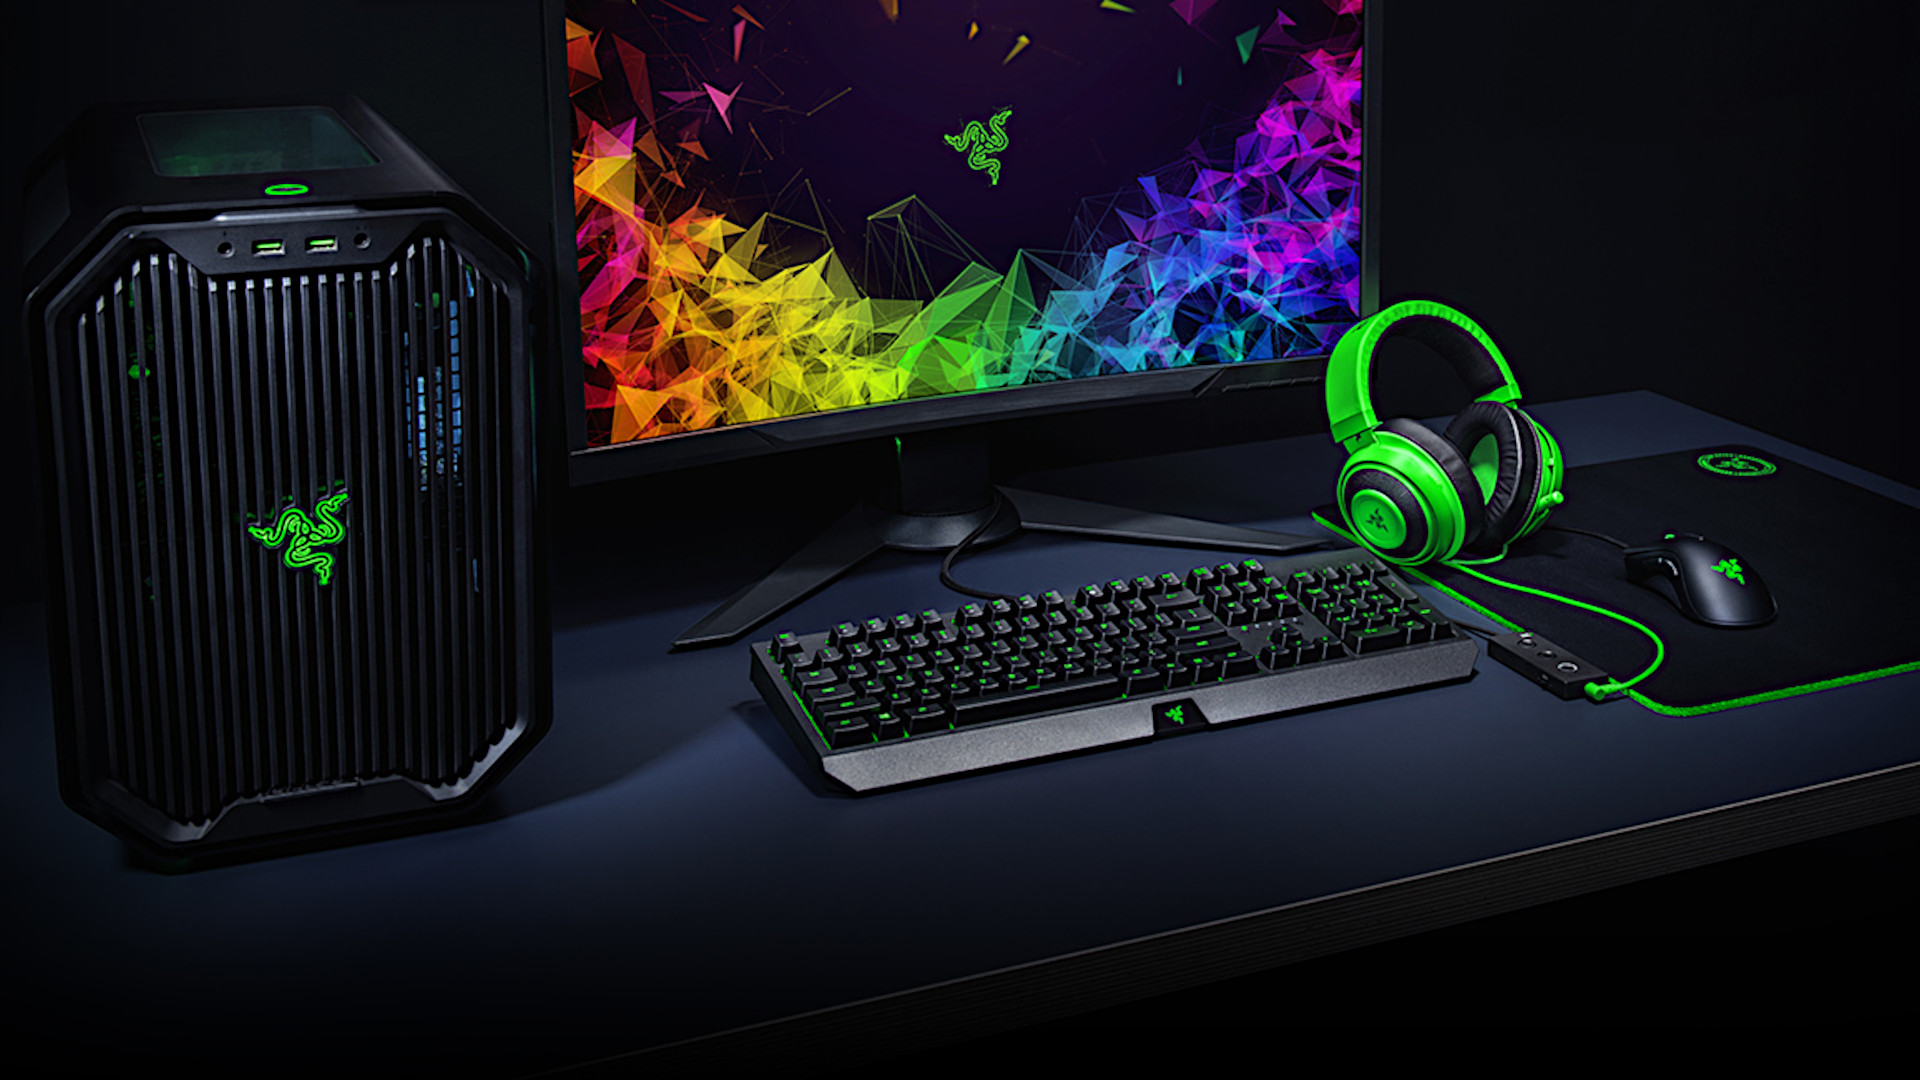 Get 20% off at the Razer store this Memorial Day weekend